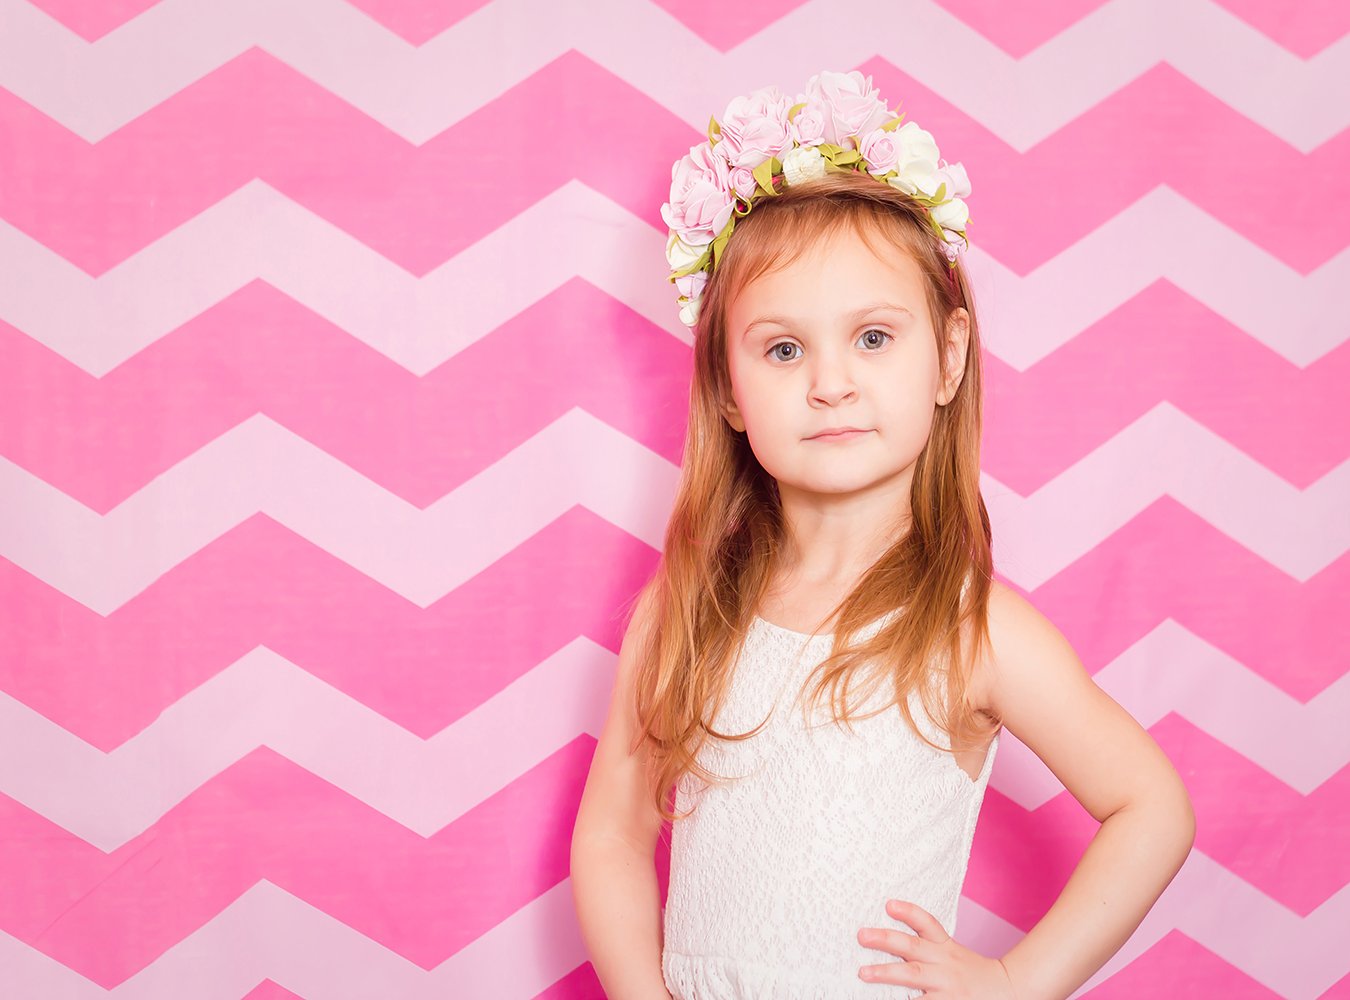 Pink and White Pink Chevron White Lines Background Portrait Photography Backdrop IBD-19957 - iBACKDROP-Baby Kid Backdrops, Beautiful Backdrops, Chevron Backdrops, photography backdrops, Pink and White, Pink Chevron White Lines, Portrait Backdrops, Portrait Photography backdrops